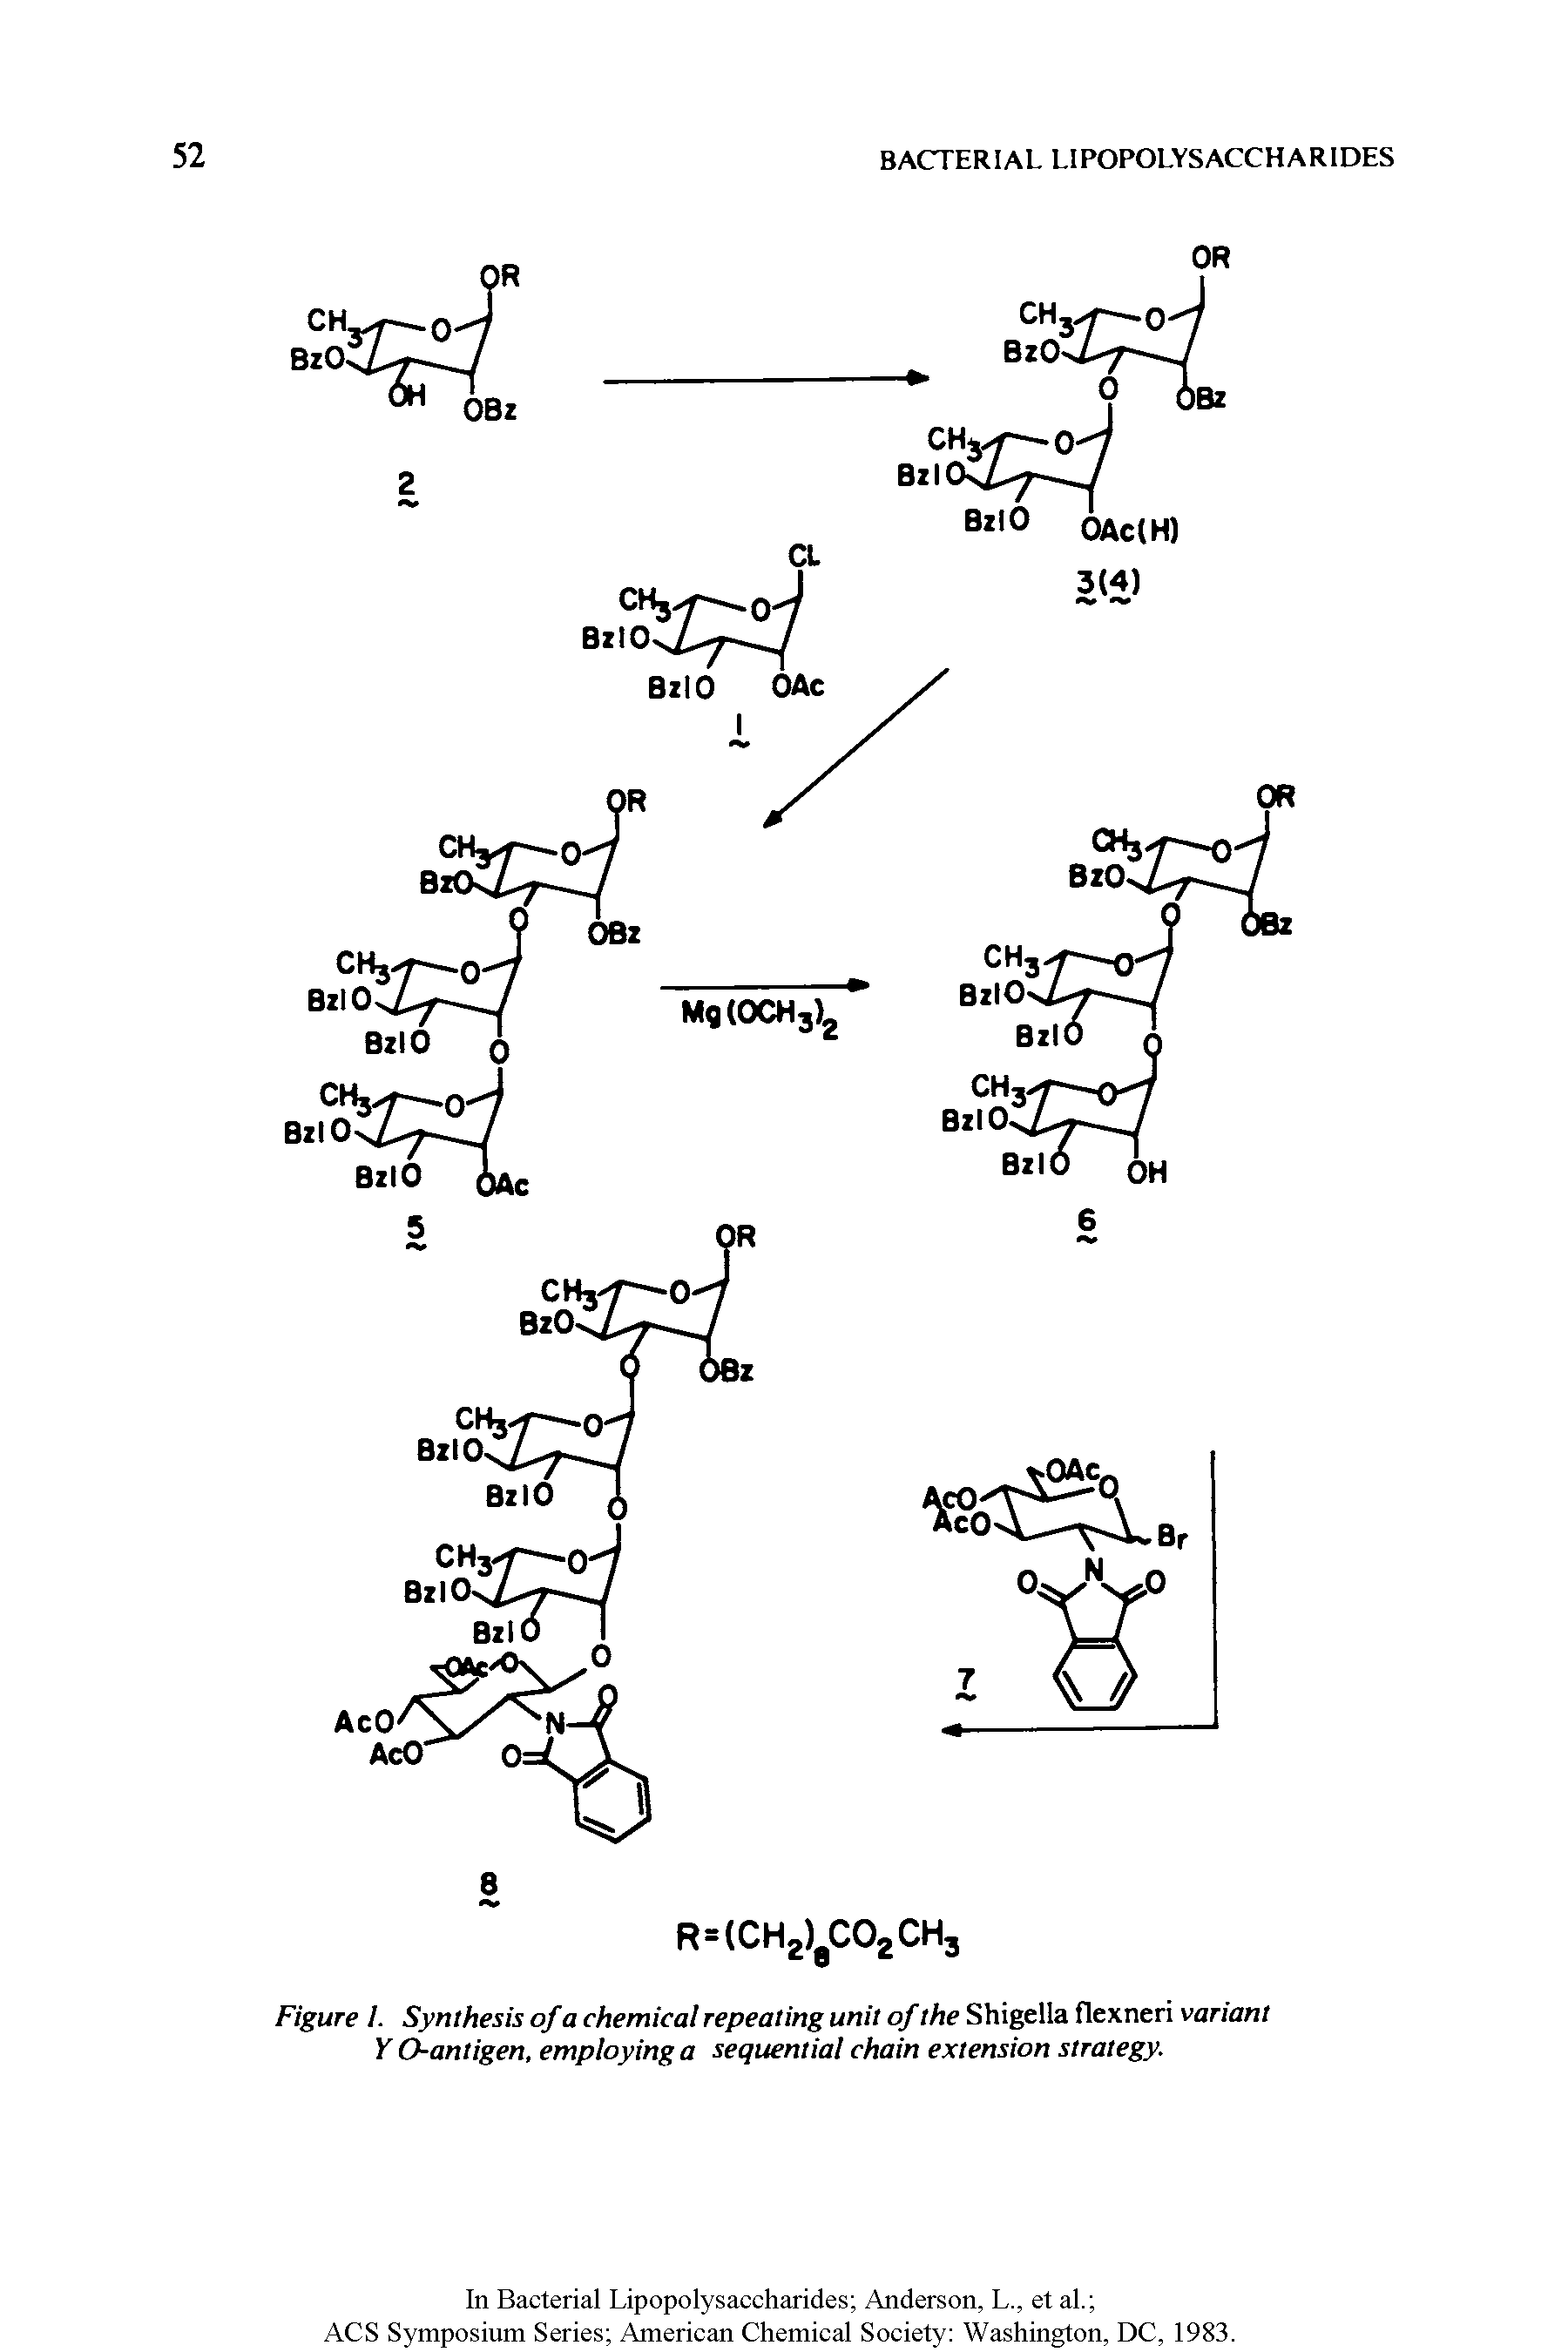 Figure 1. Synthesis of a chemical repeating unit of the Shigella flexneri variant Y O-antigen, employing a sequential chain extension strategy.